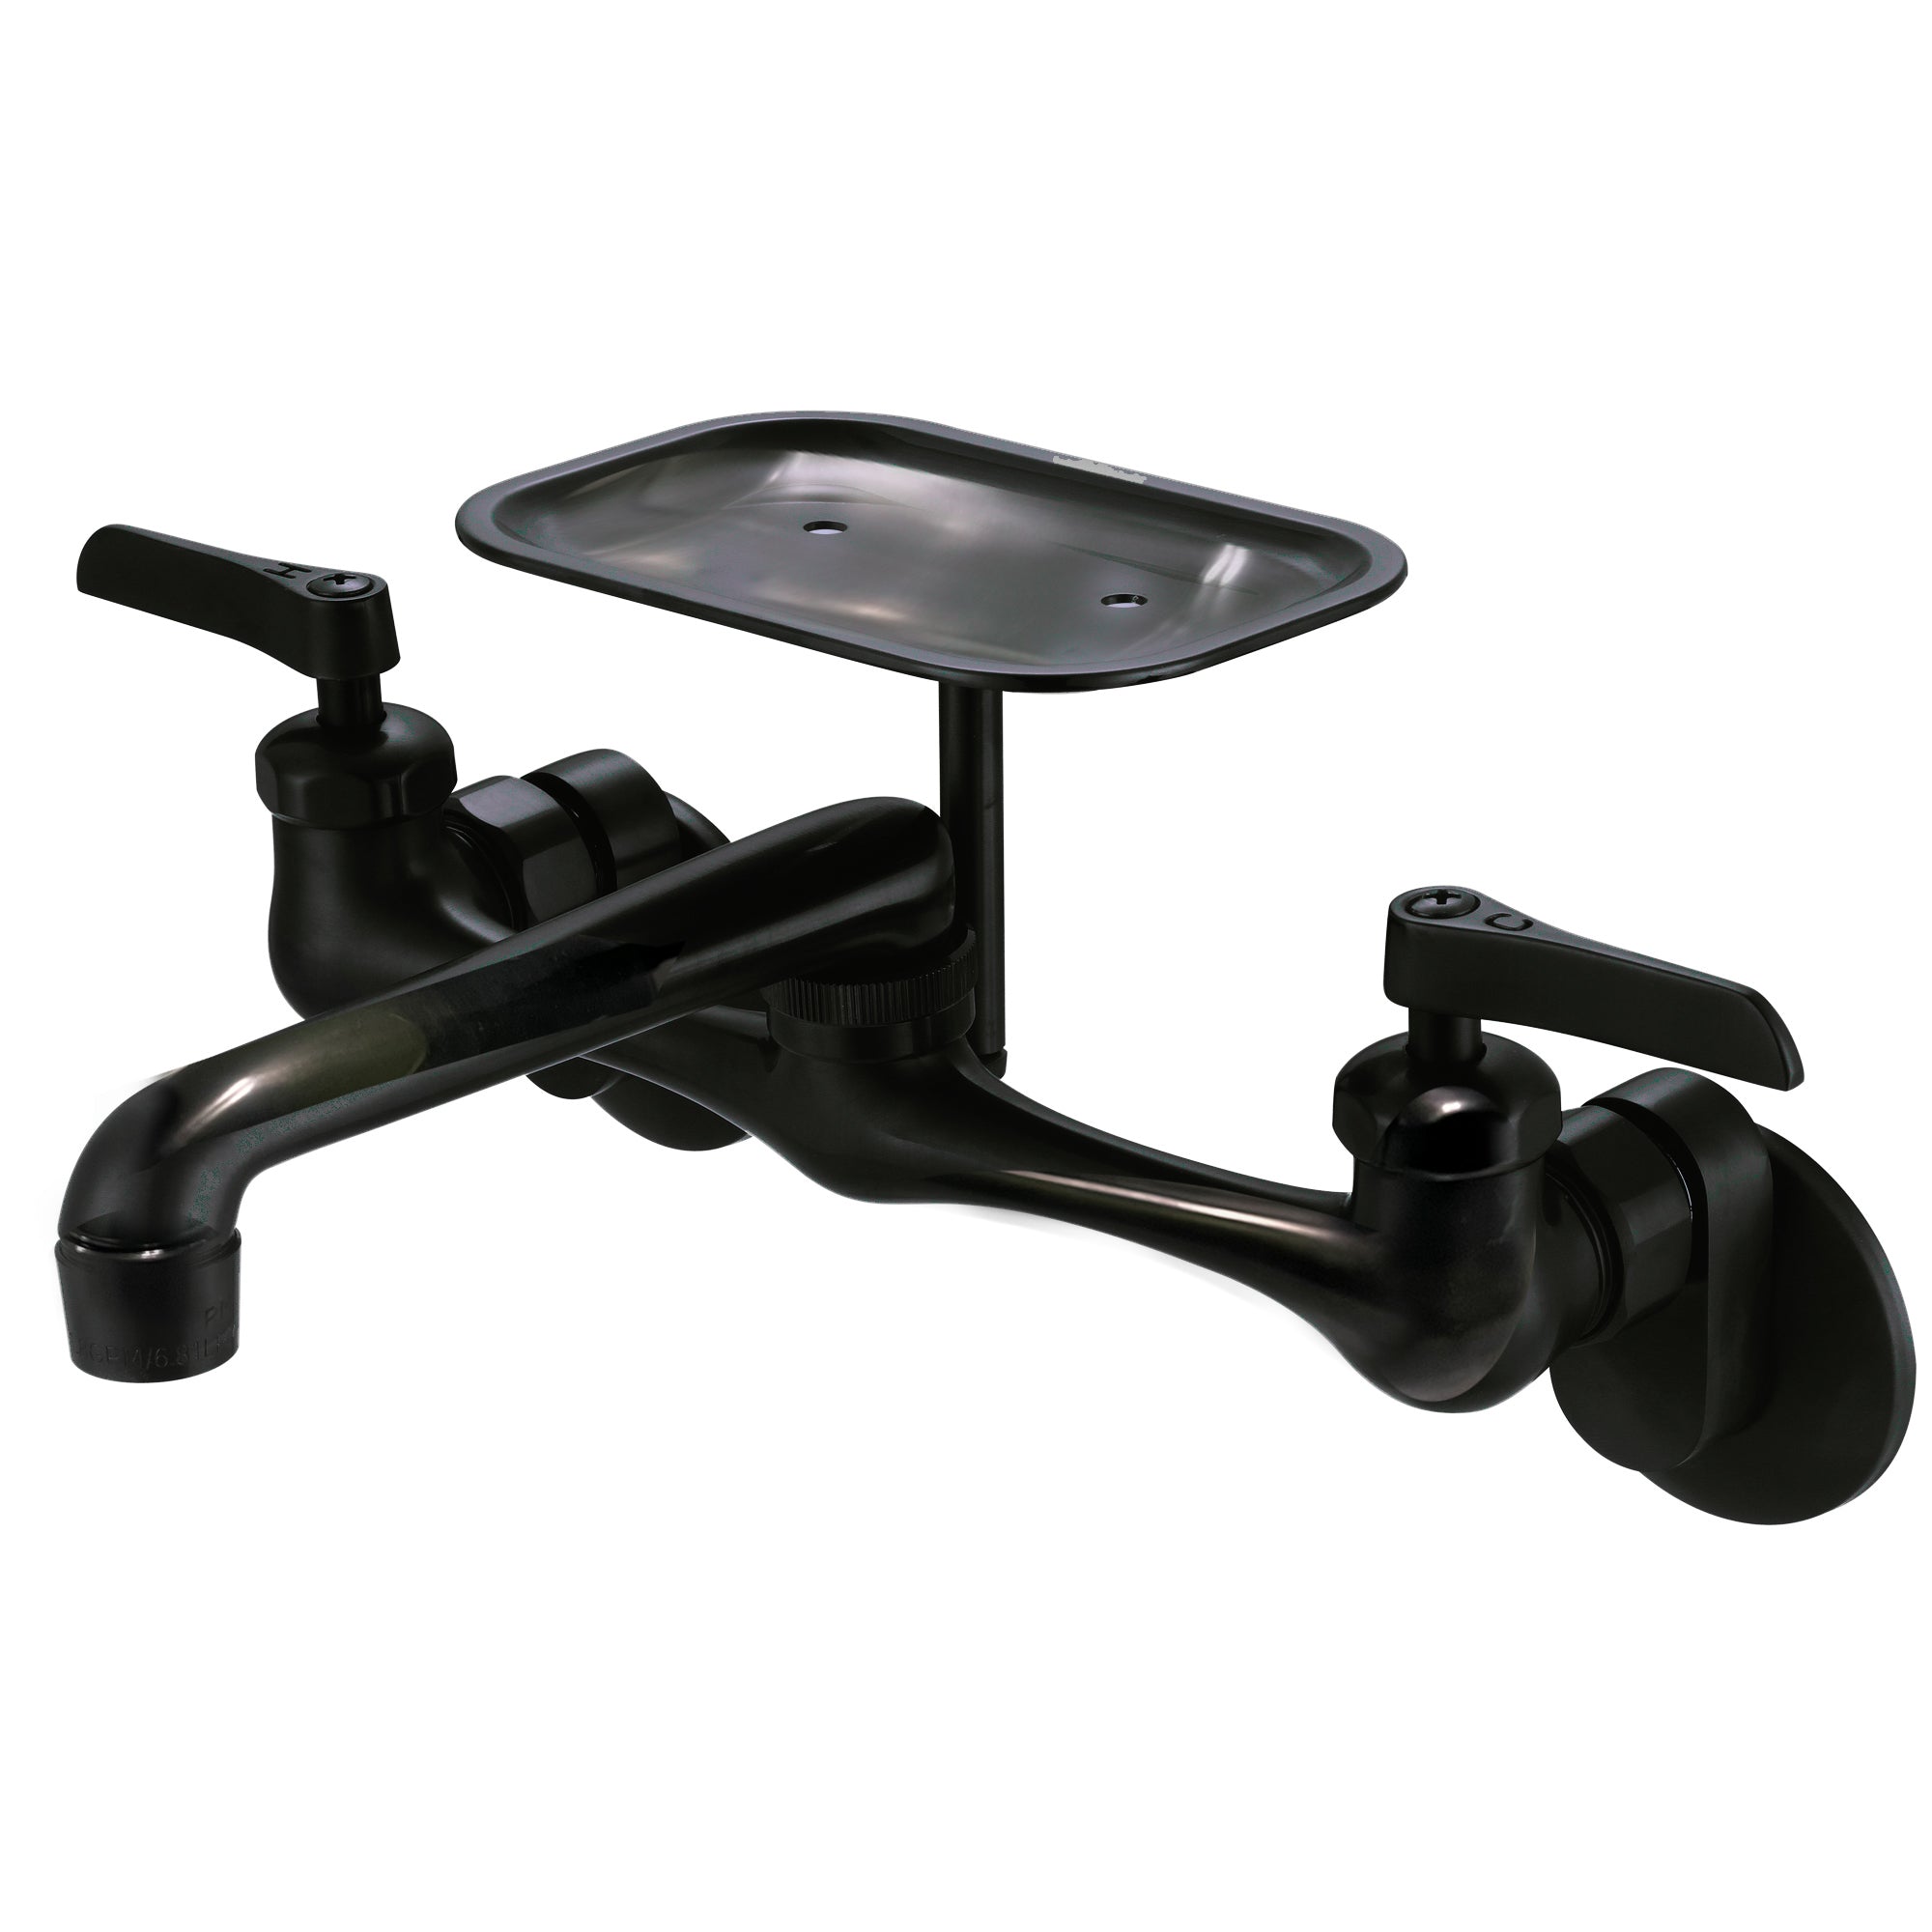 Nantucket Sinks Matte Black Wall Mount Utility Faucet with Soap Dish